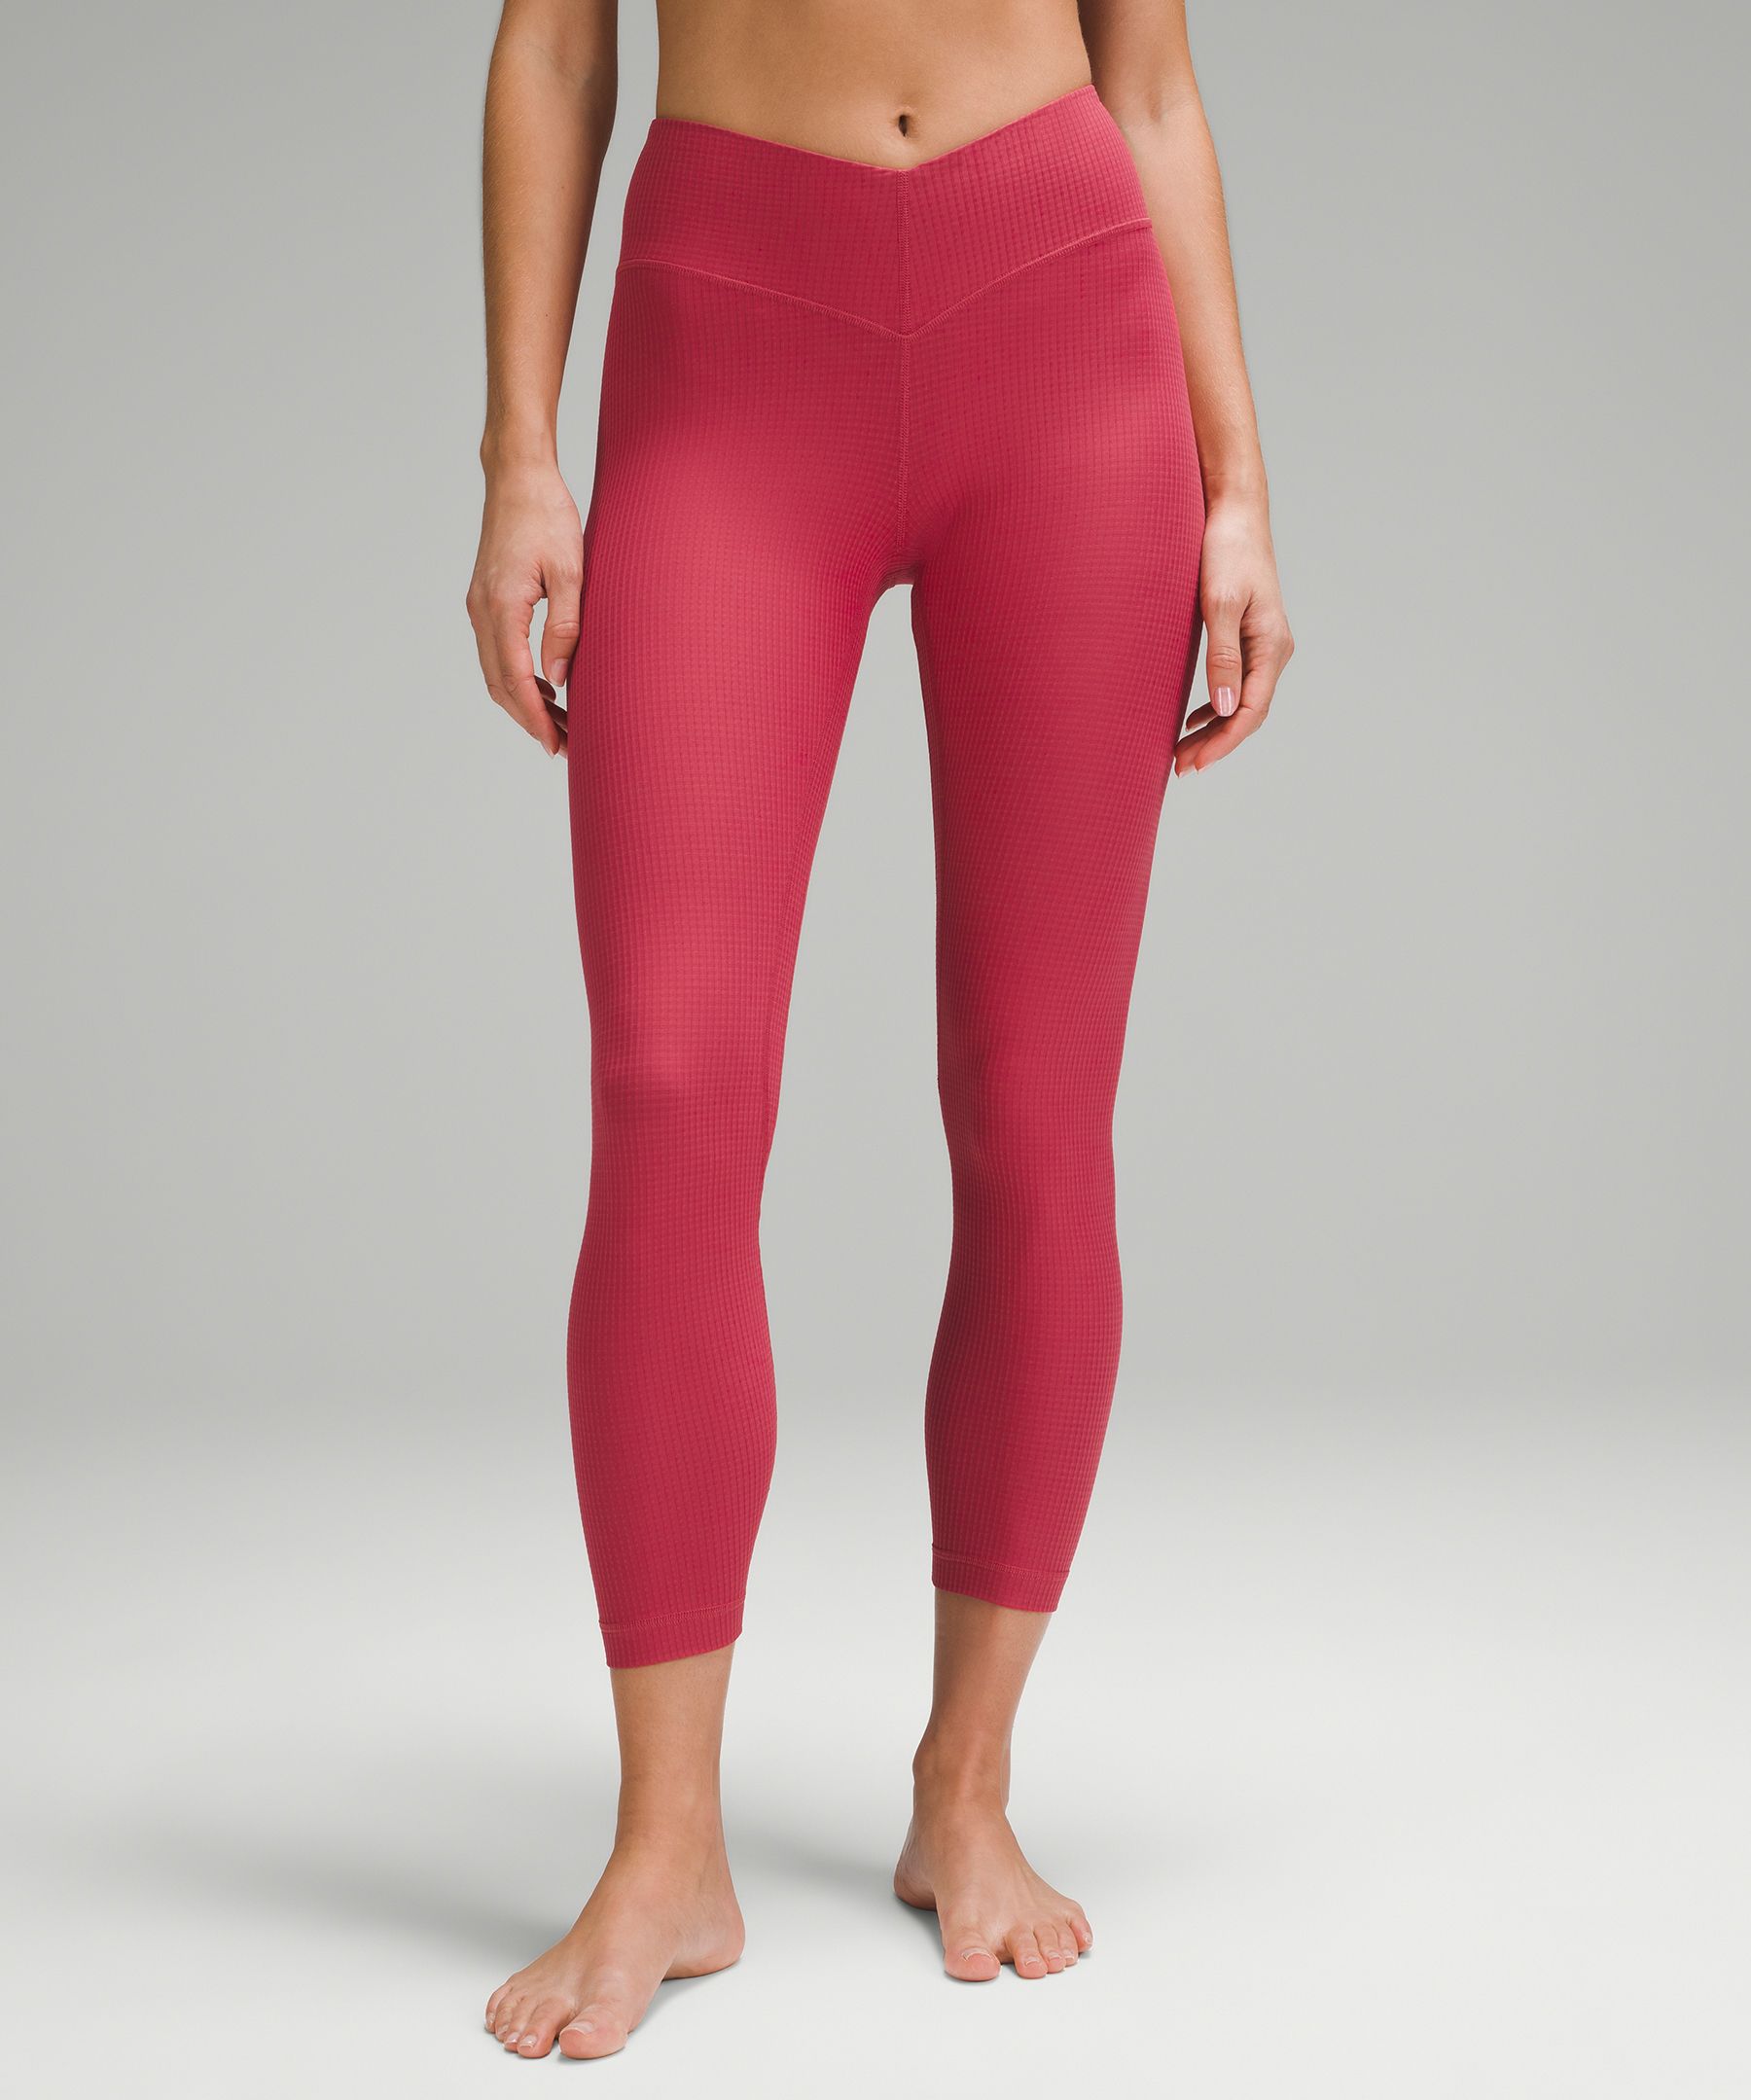 Geometric high-rise leggings in pink - Live The Process